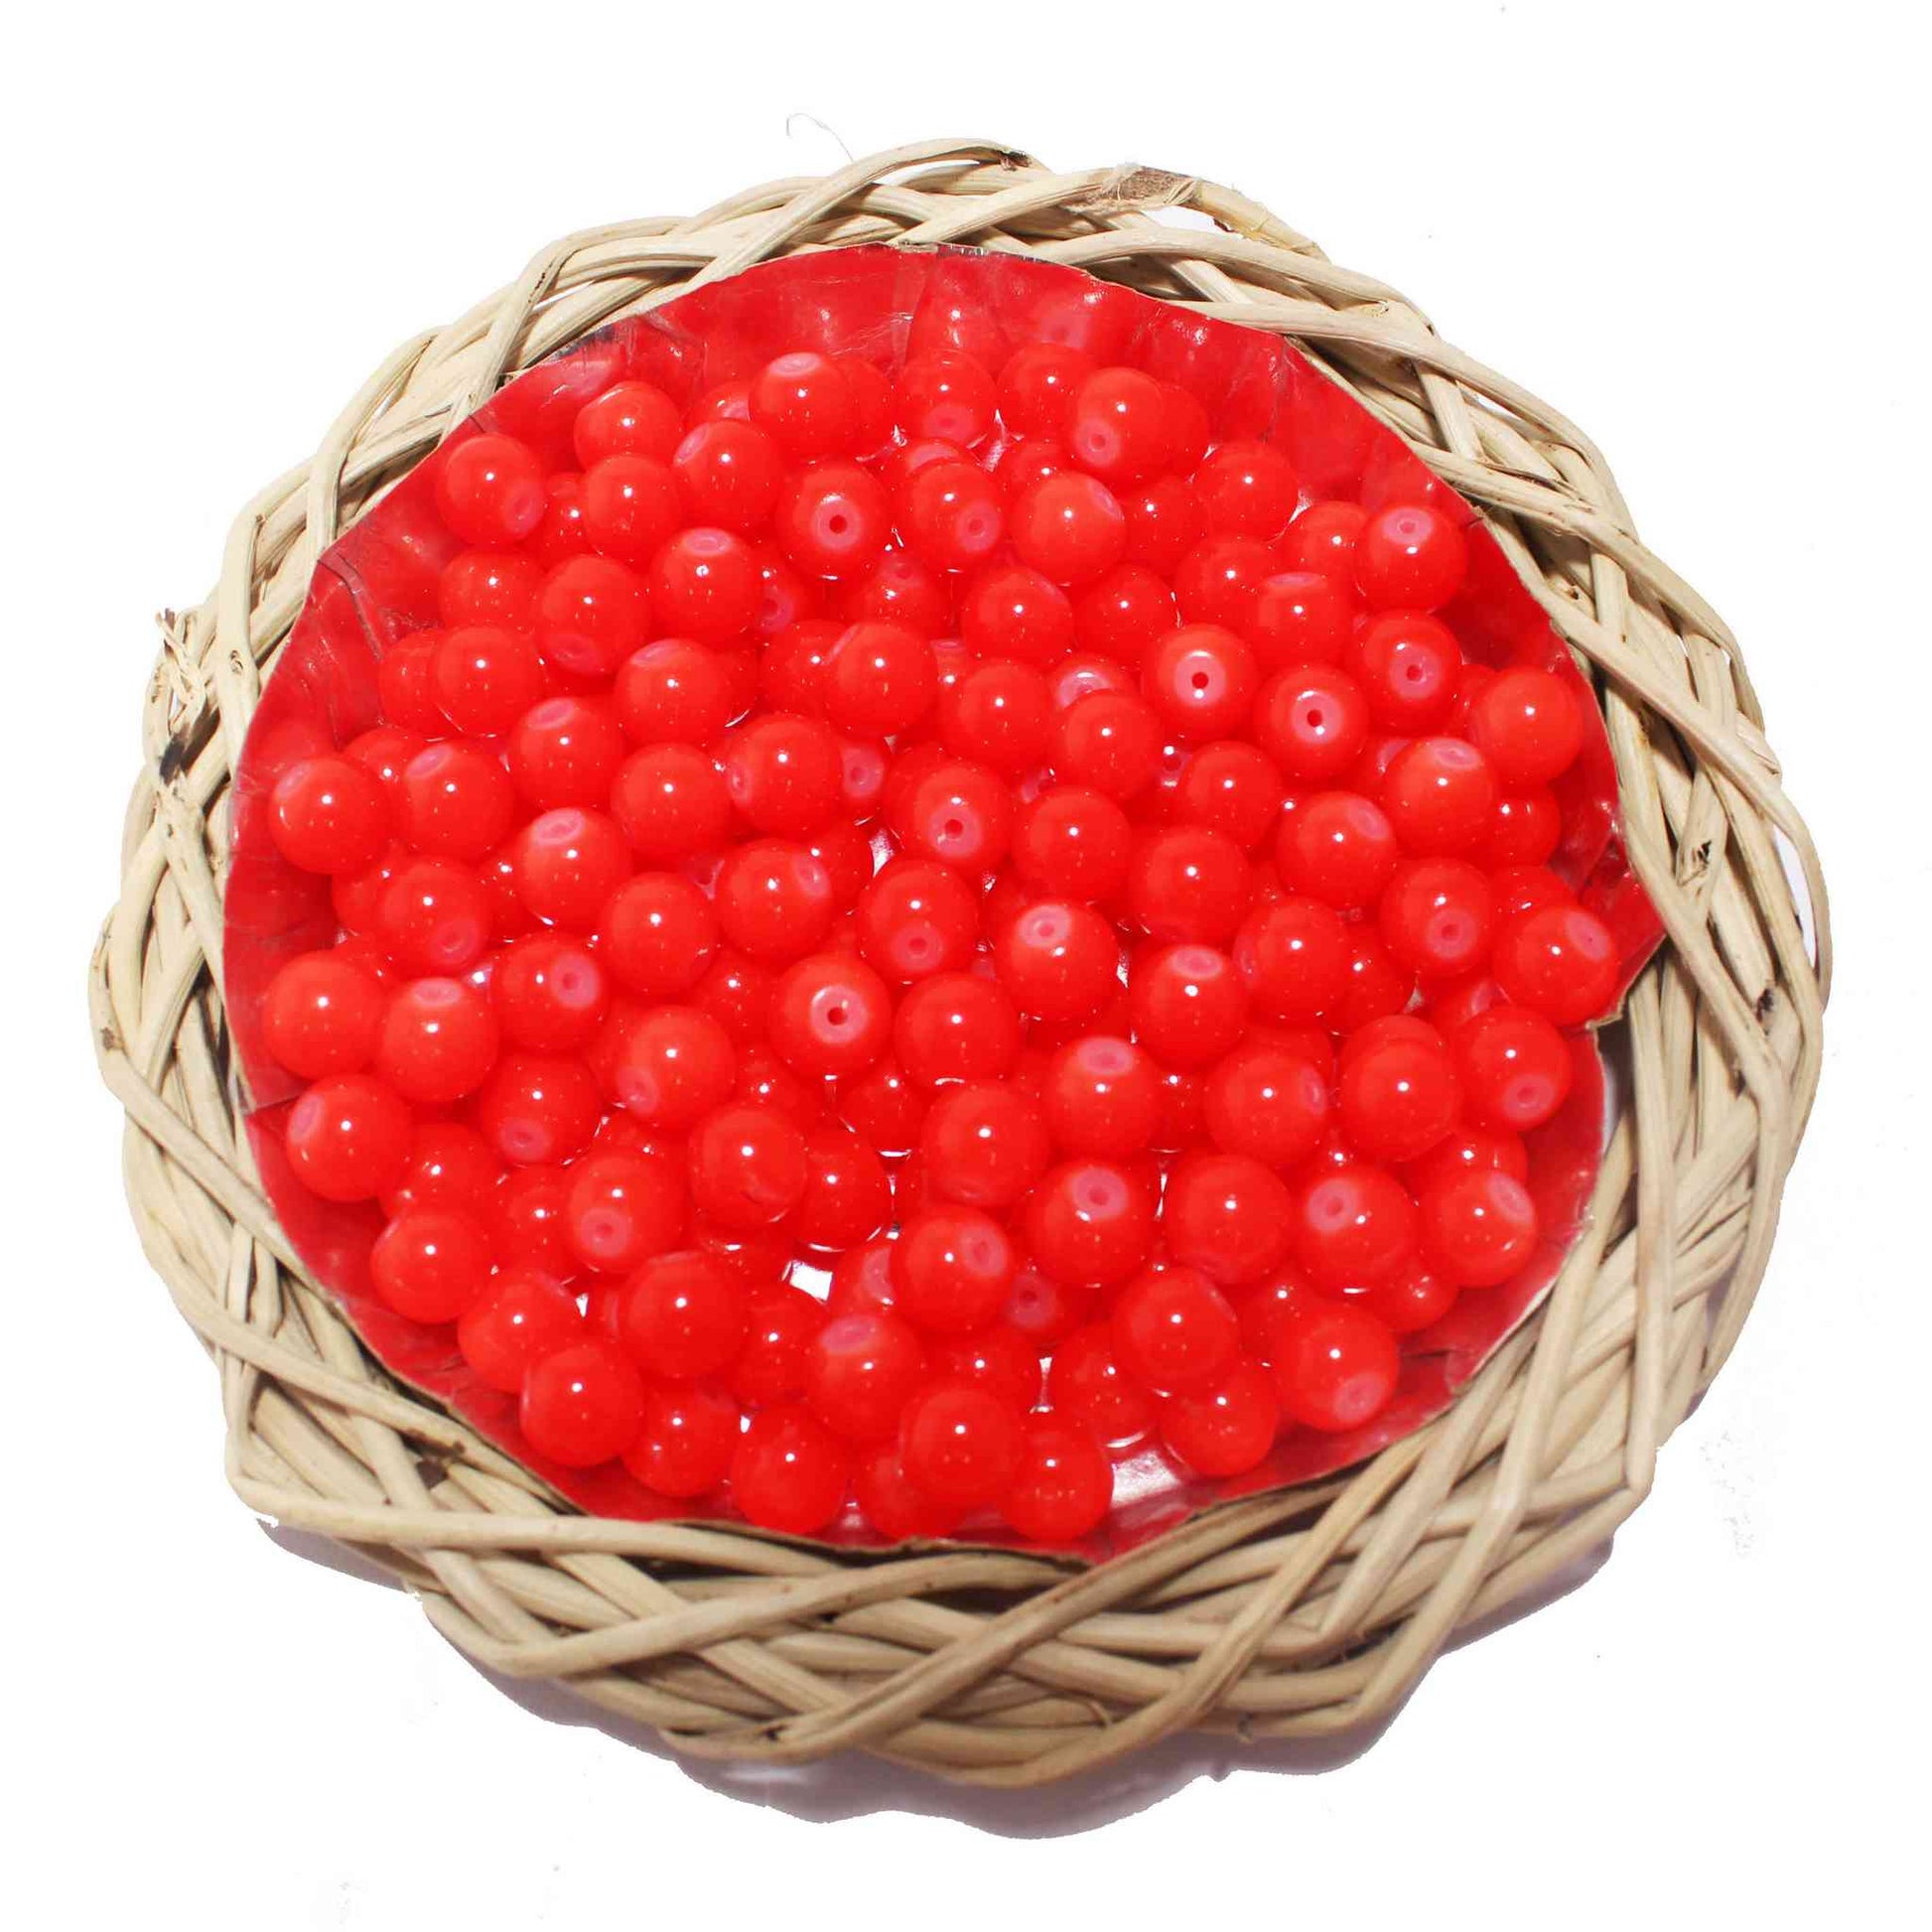 Premium quality Round shape Glass Beads for DIY Craft, Trousseau Packing or Decoration - Design 725, 10mm, Red - Indian Petals